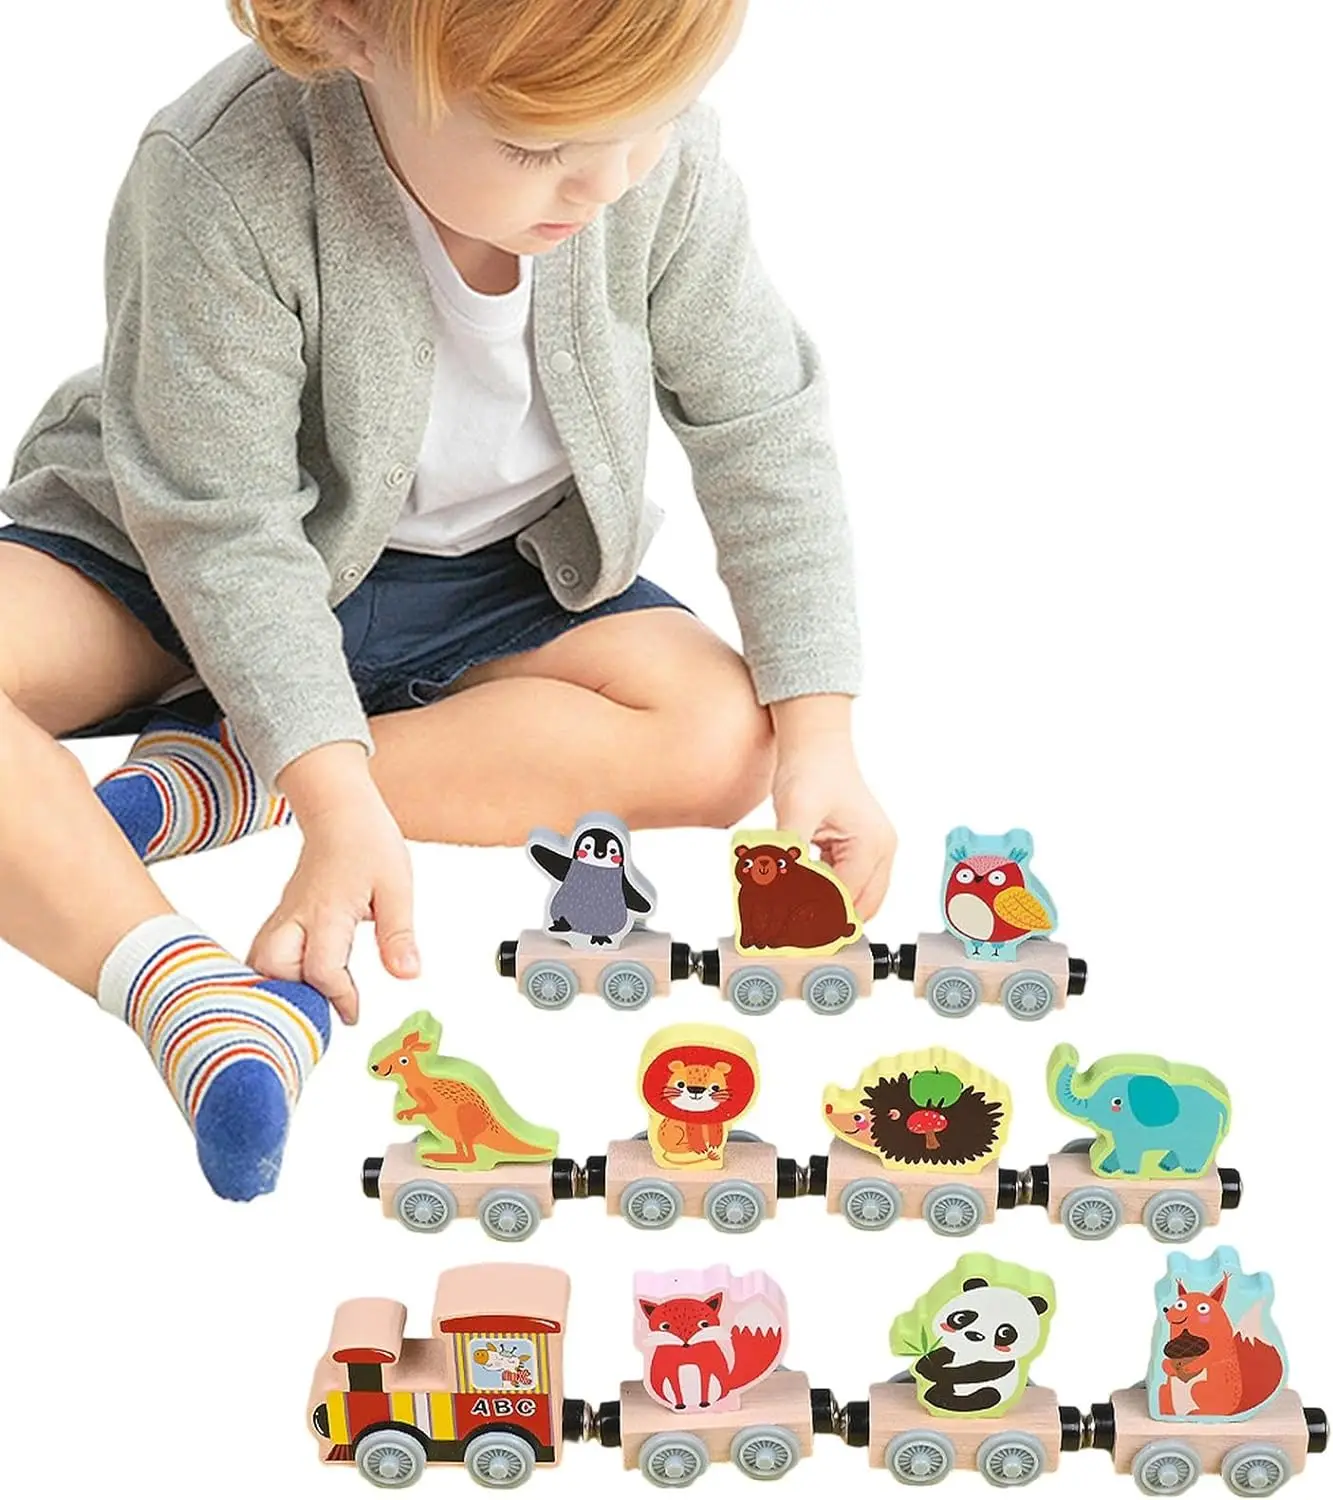 Montessori Wooden Magnetic Train Toys Car Cartoon Set Early Educational Sorting and Stacking Toy Sensory Fine Motor Skills